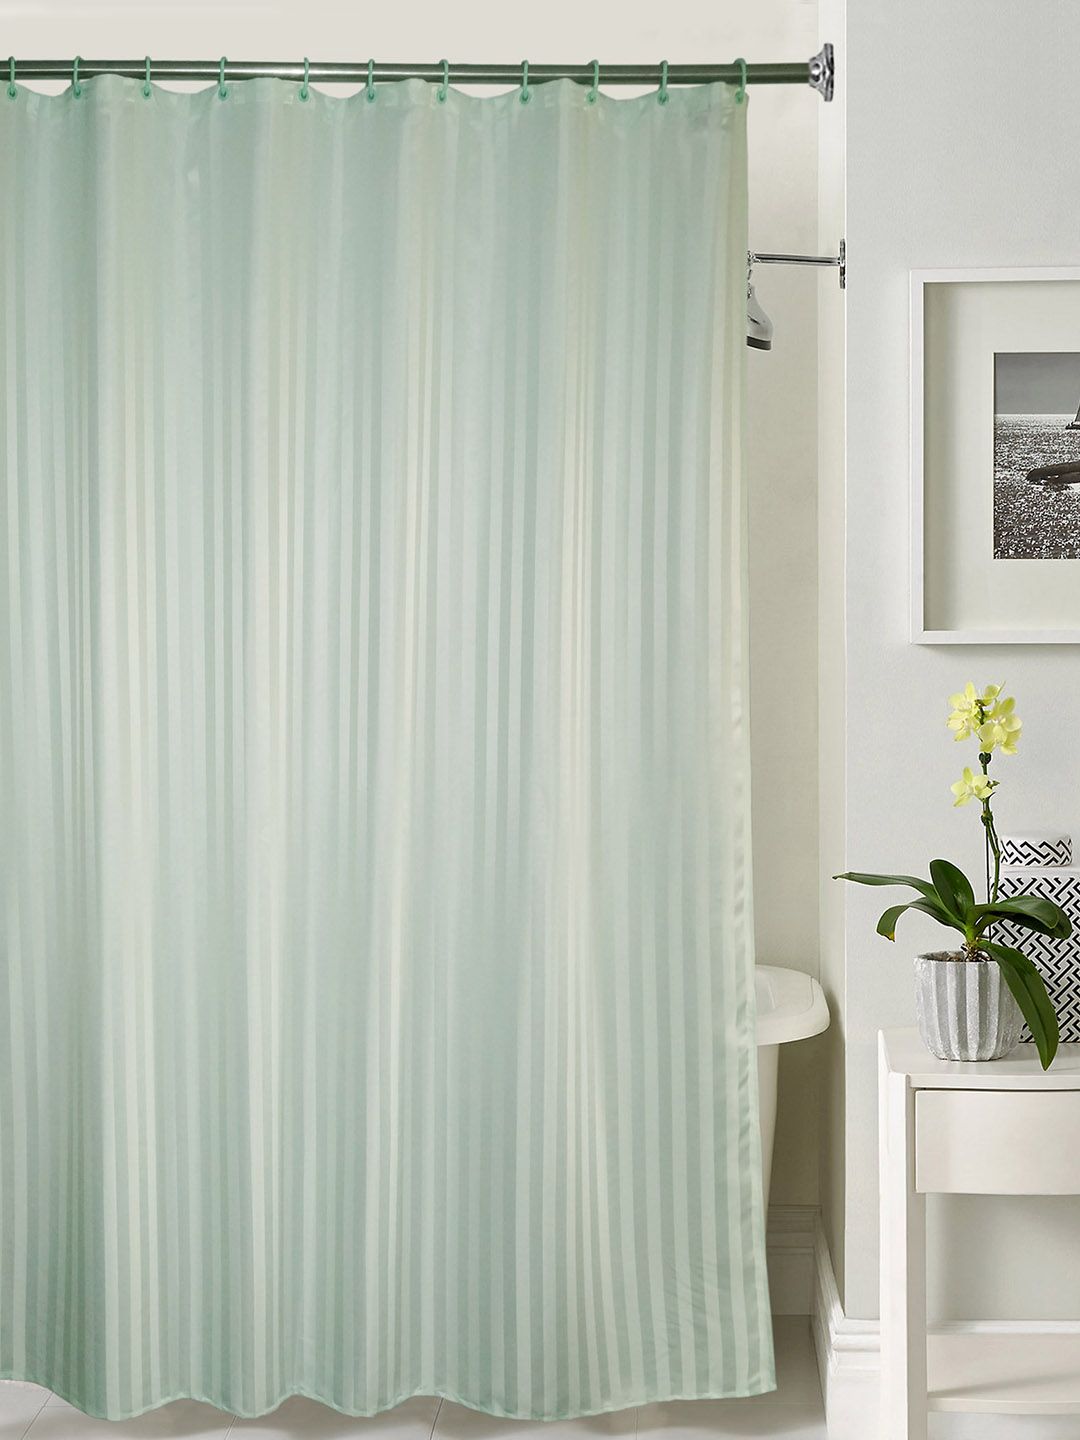 Lushomes Sea Green Striped Shower Curtain Price in India